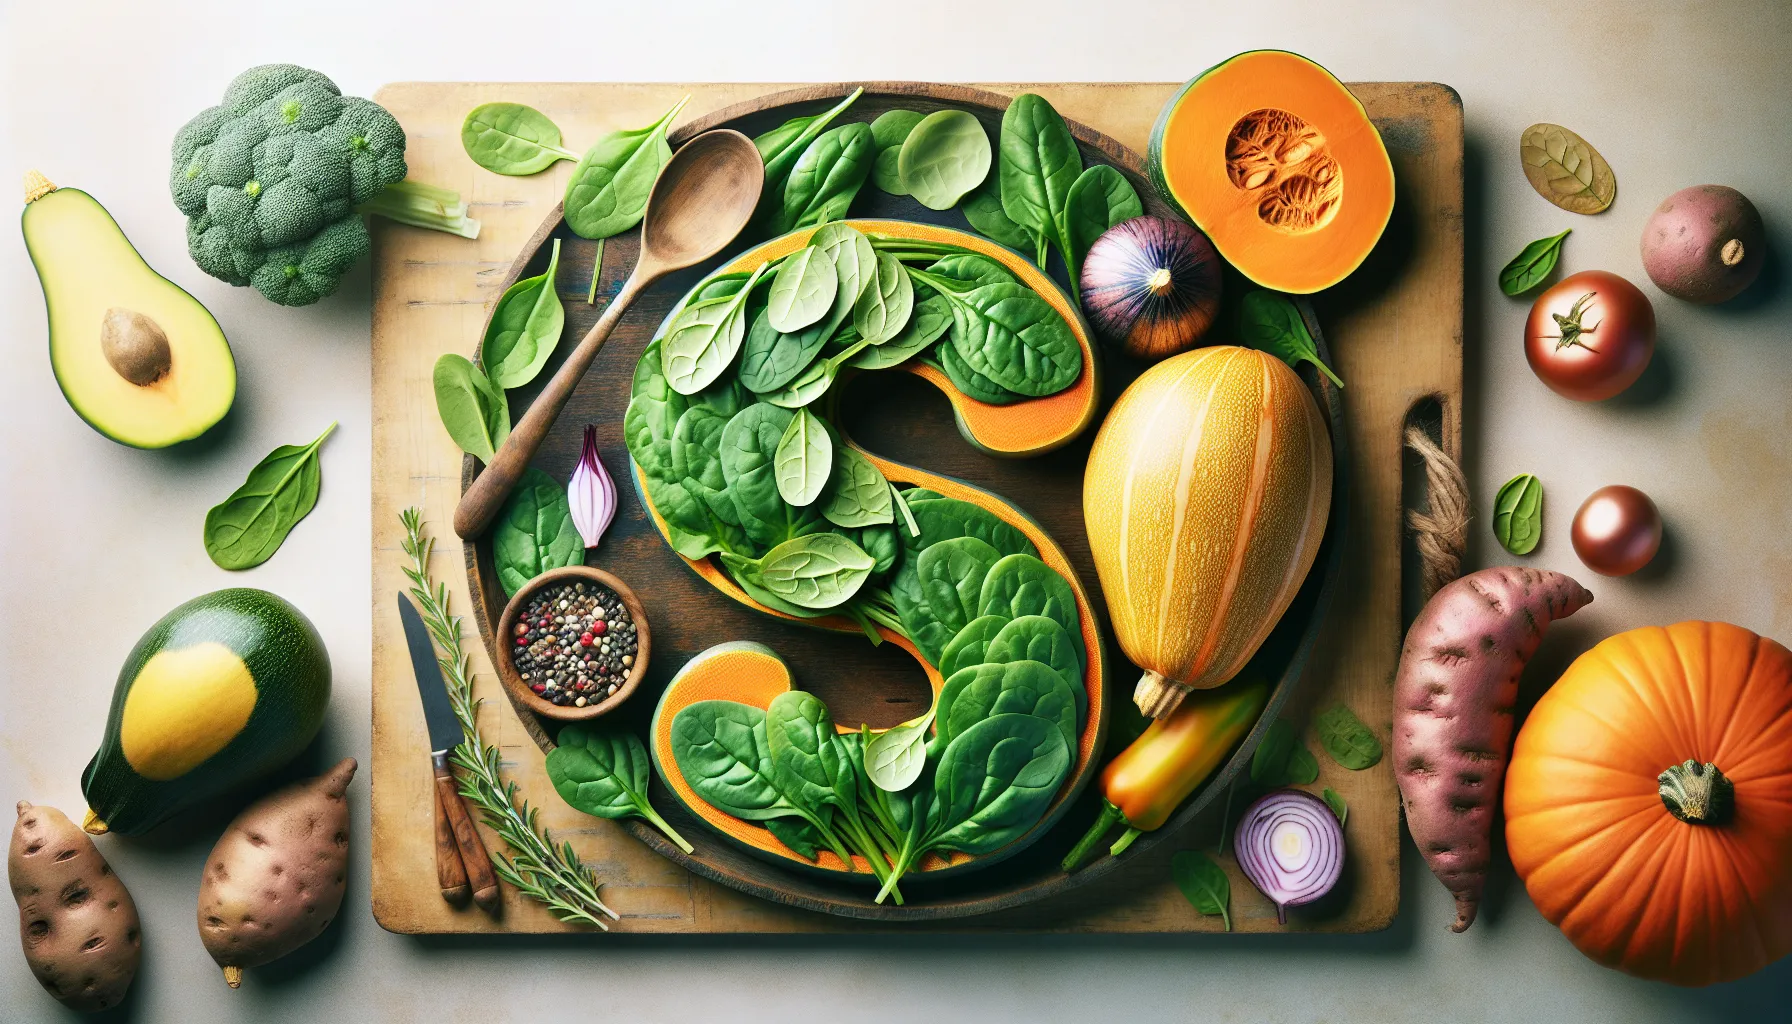 A colorful array of fresh produce including vegetables that start with S, like spinach, arranged artistically on a wooden surface with cooking utensils.